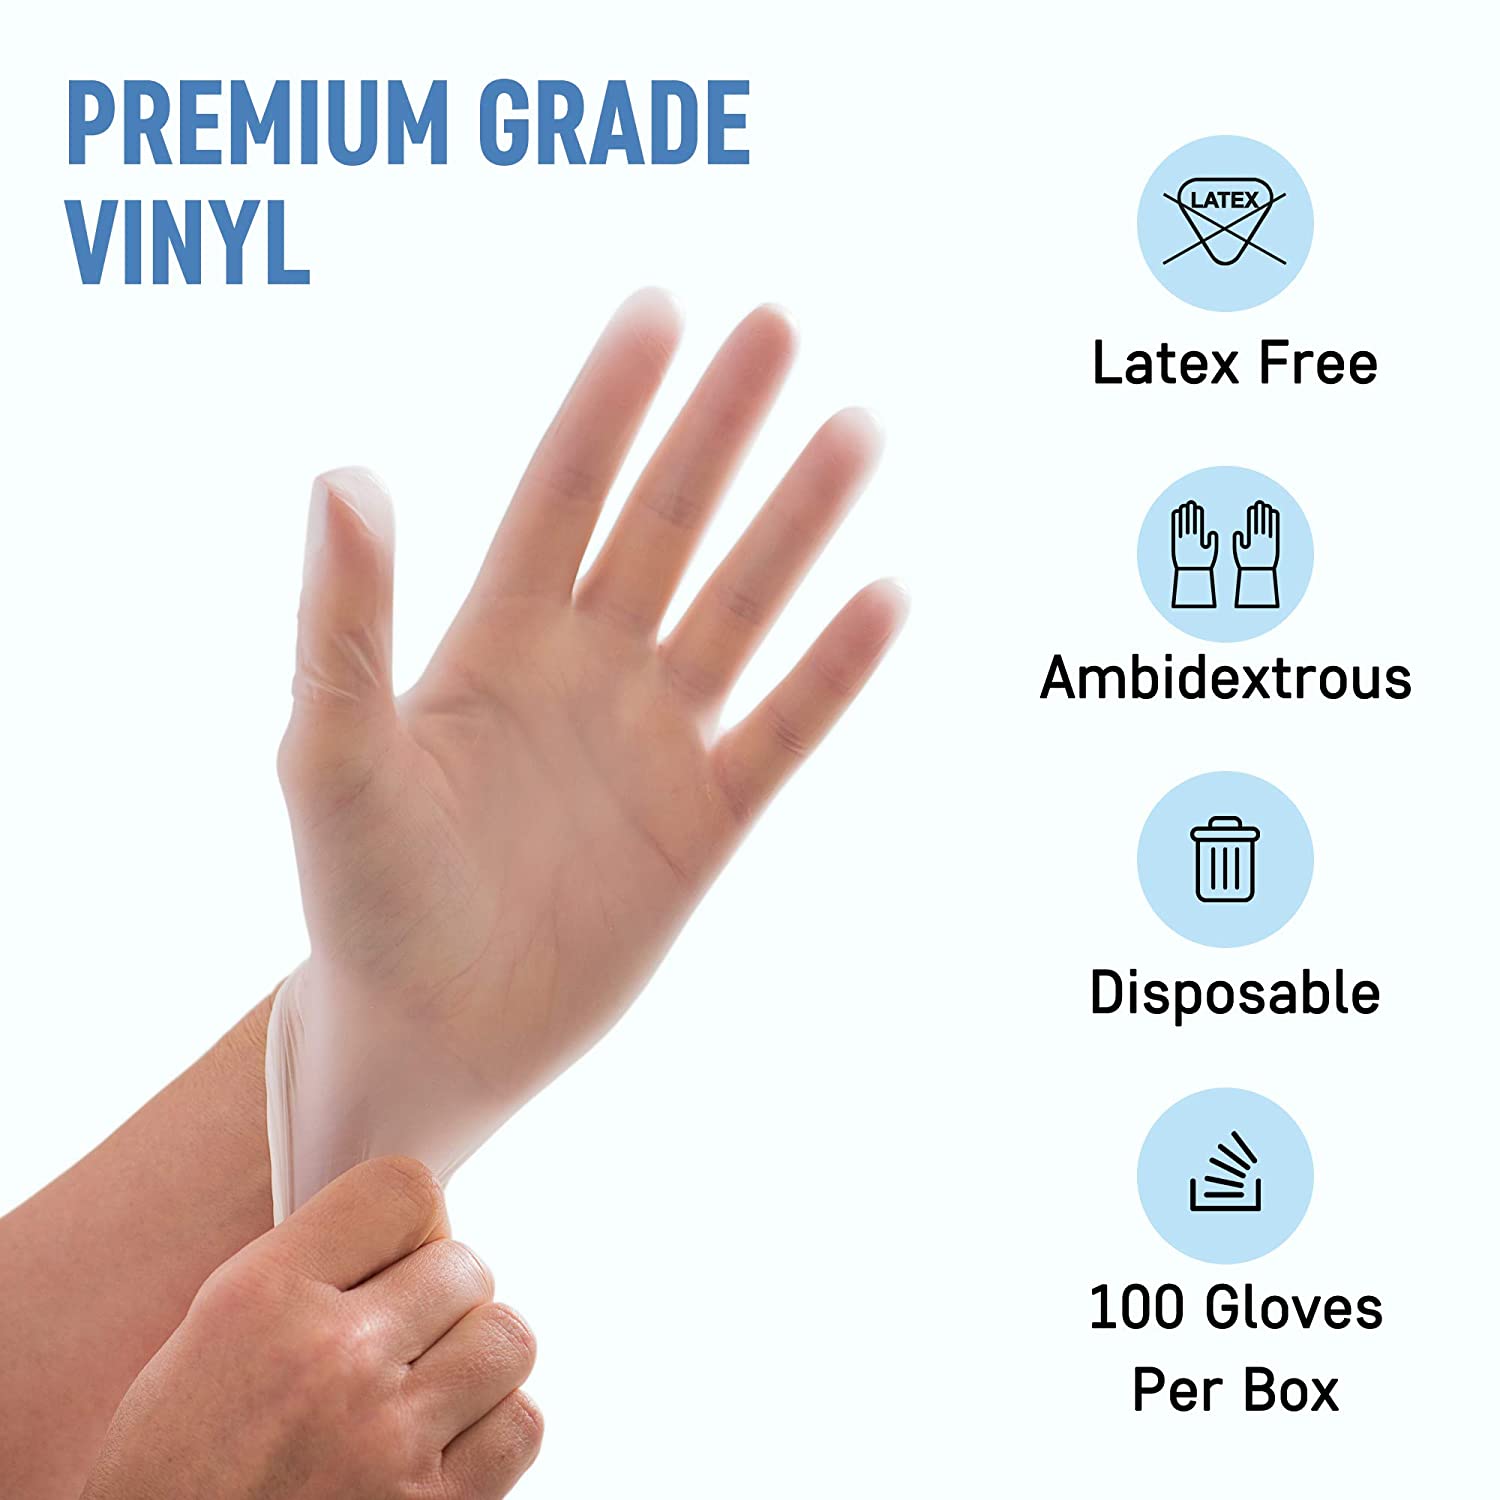 Powder Free Disposable Gloves Medium, 1000 Count -4 Mil Clear Vinyl Gloves- Extra Strong, 4 Mil Thick - Latex Free, Food Safe - Medical Exam Gloves, Cleaning Gloves - 50 Boxes of 100